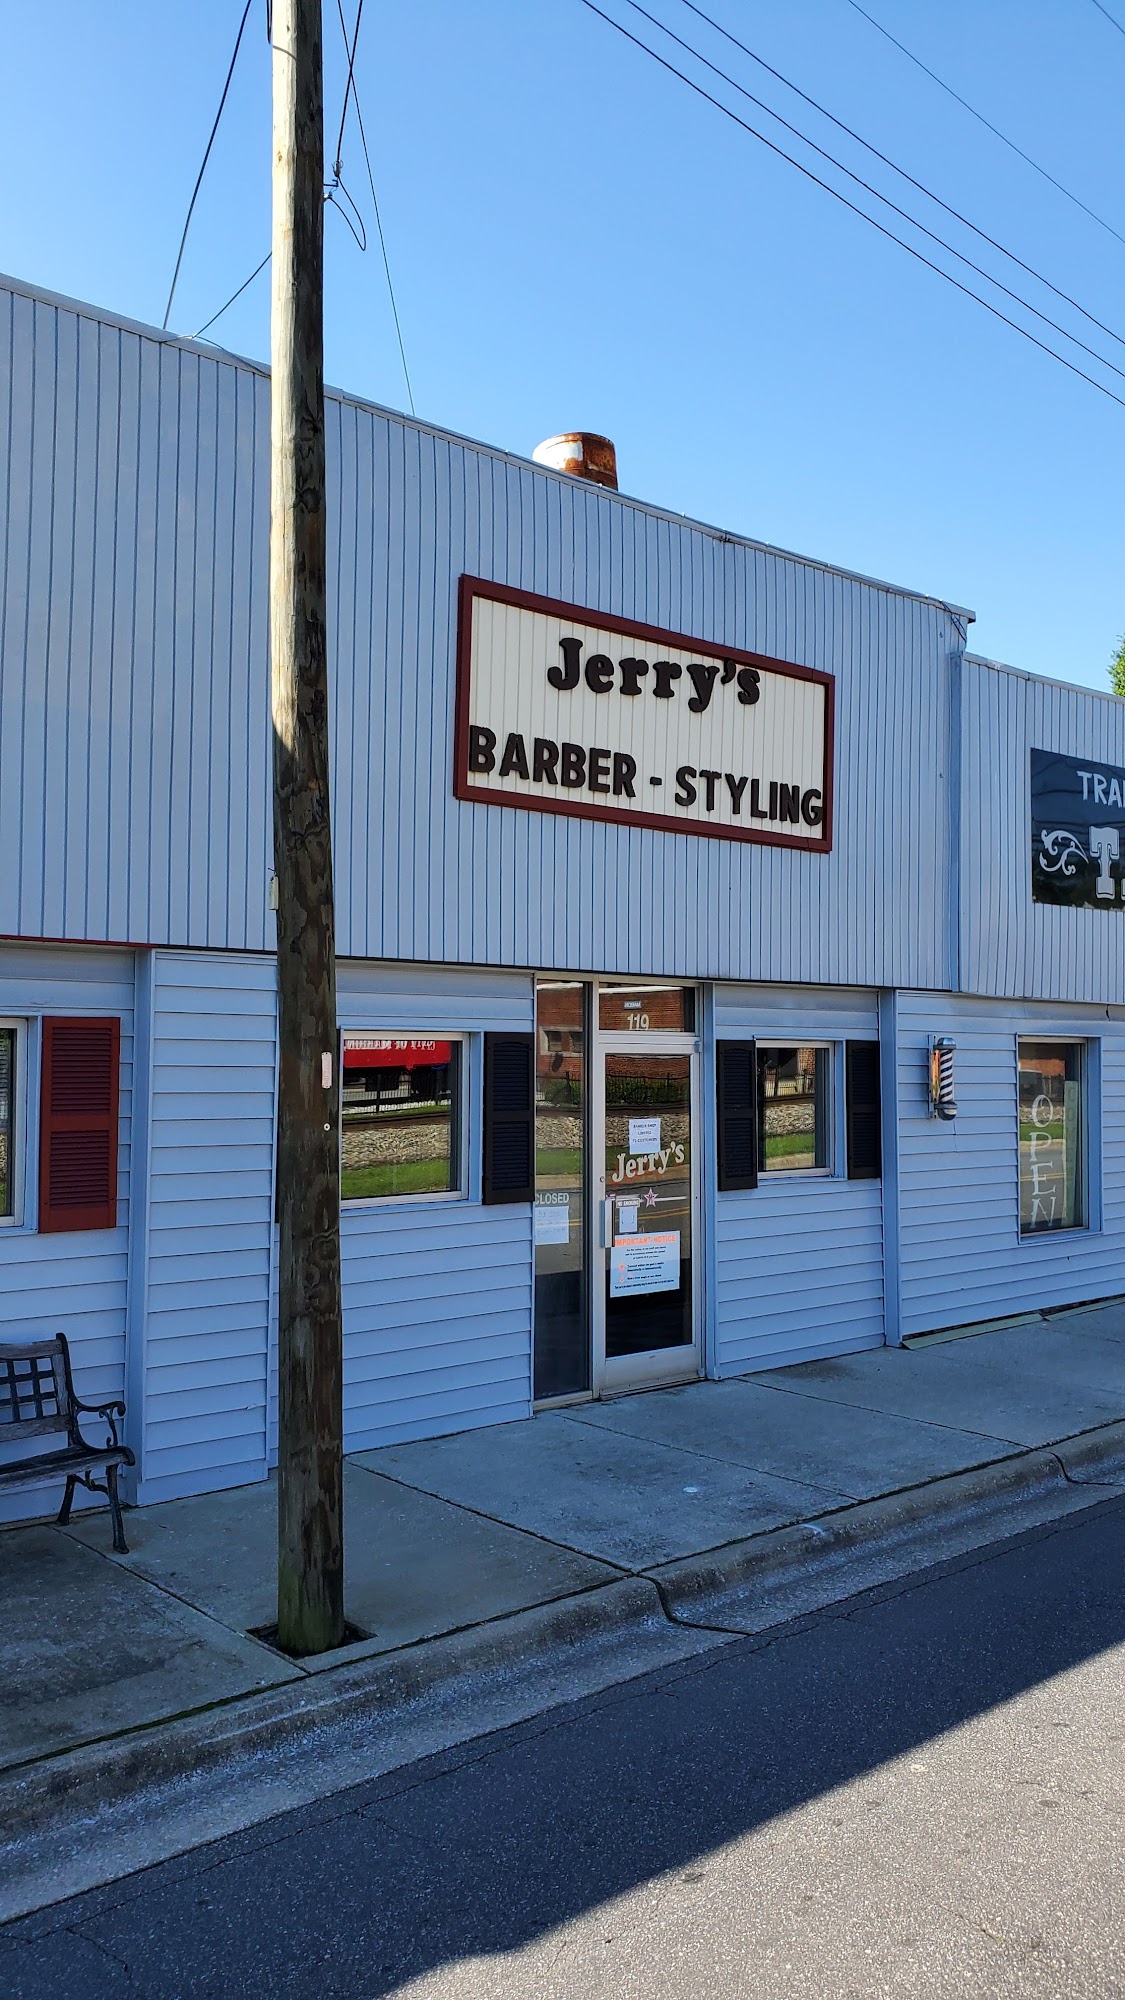 Jerry's Barber & Style Shop